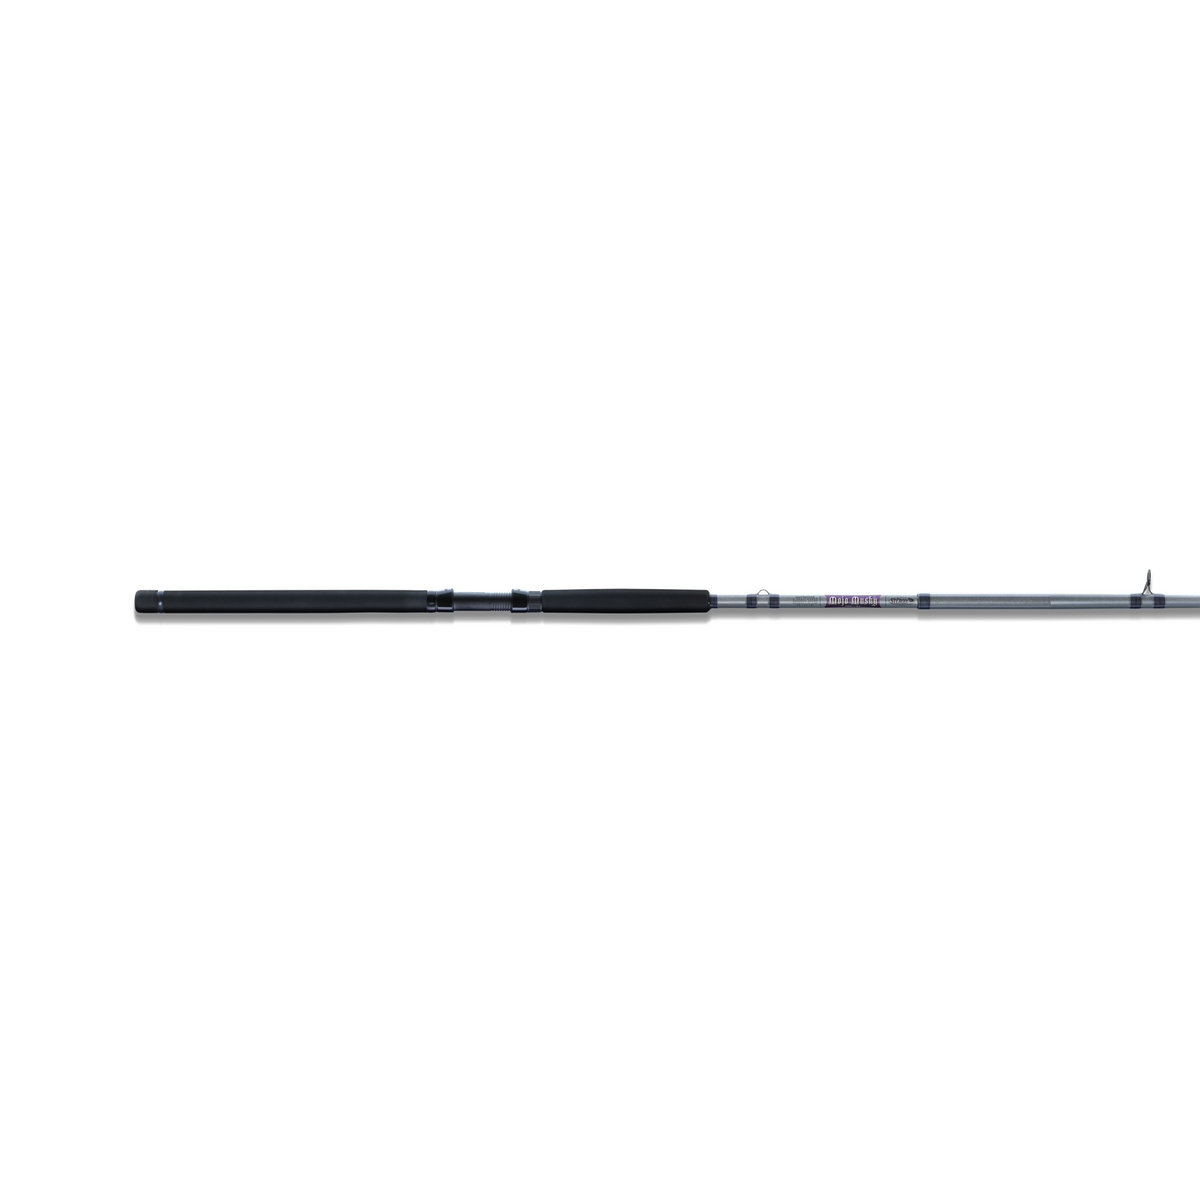 ST CROIX MOJO BASS SPINNING RODS - Cabin Creek Supply